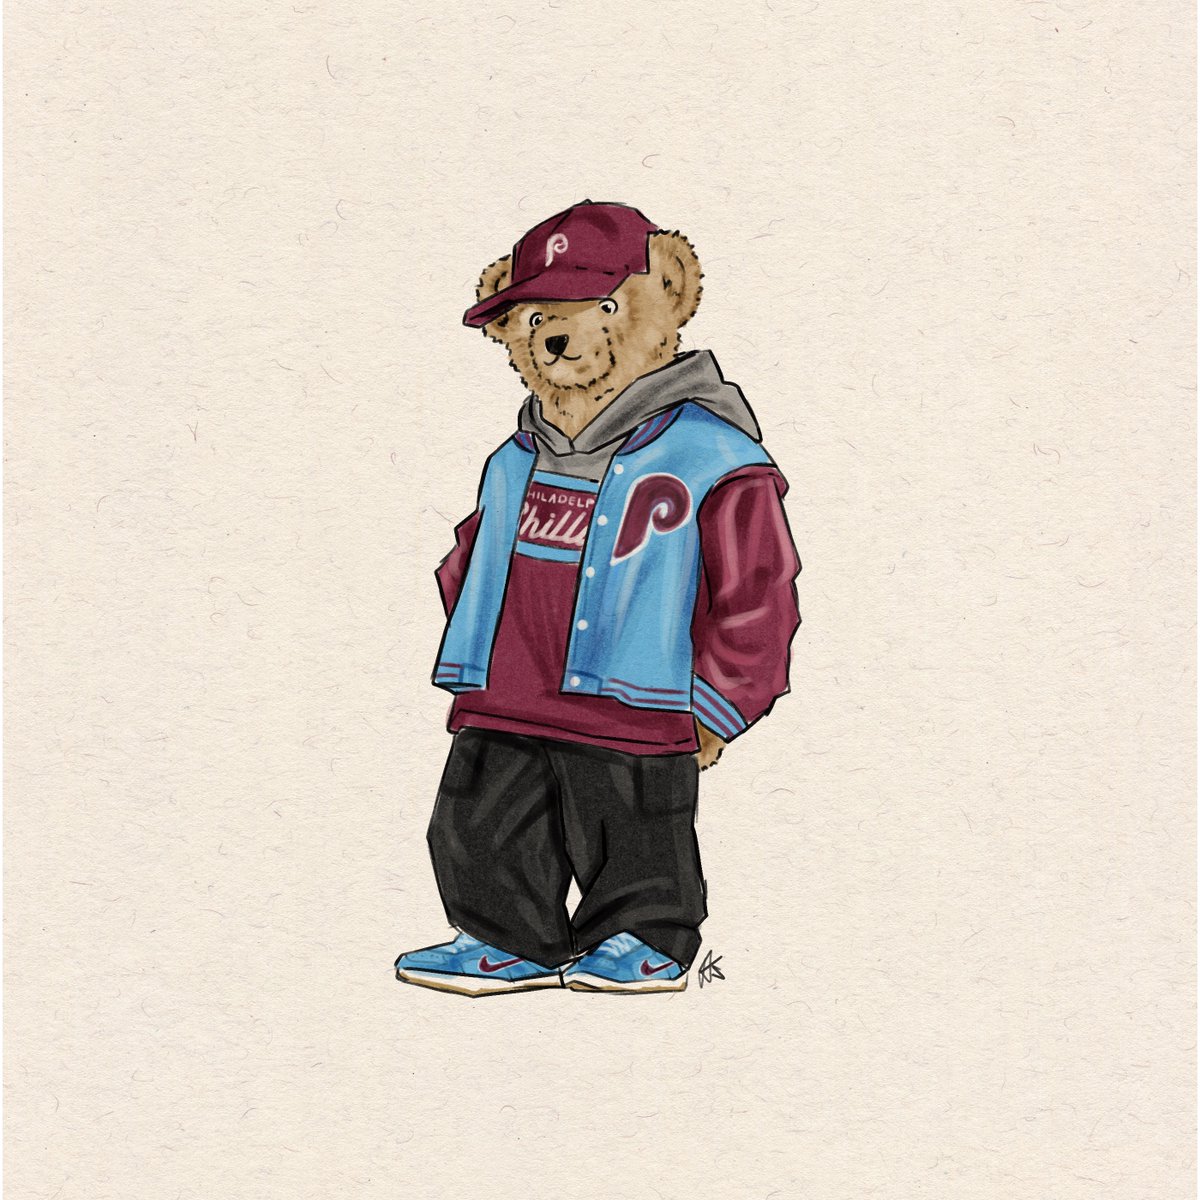 phils polo bear you have to stop. your drip too hard. your swag too different. your powder blue dunks too fresh. they’ll kill you